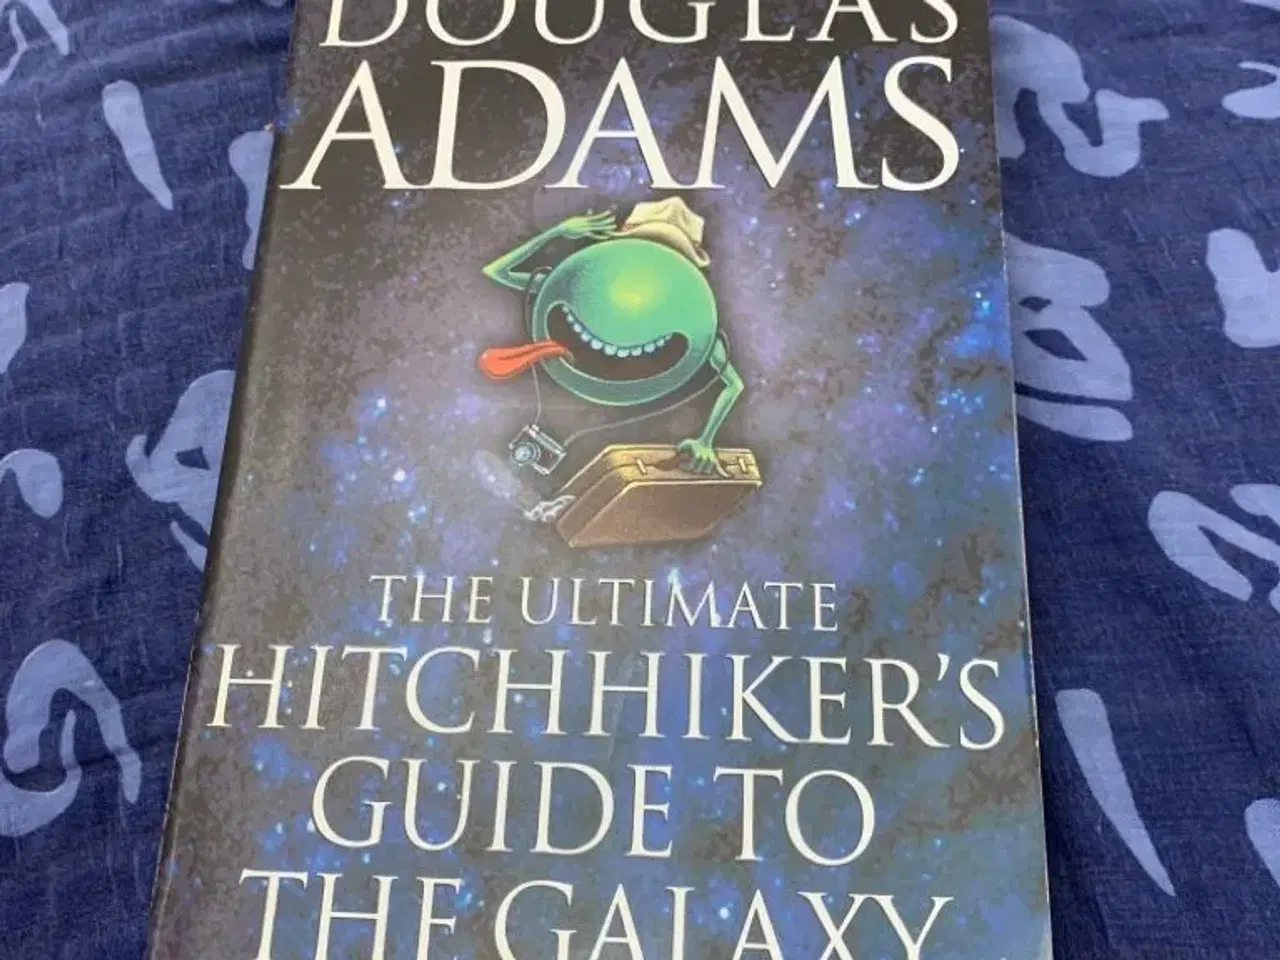 Billede 1 - The hitchhiker?s guide to the Galaxy